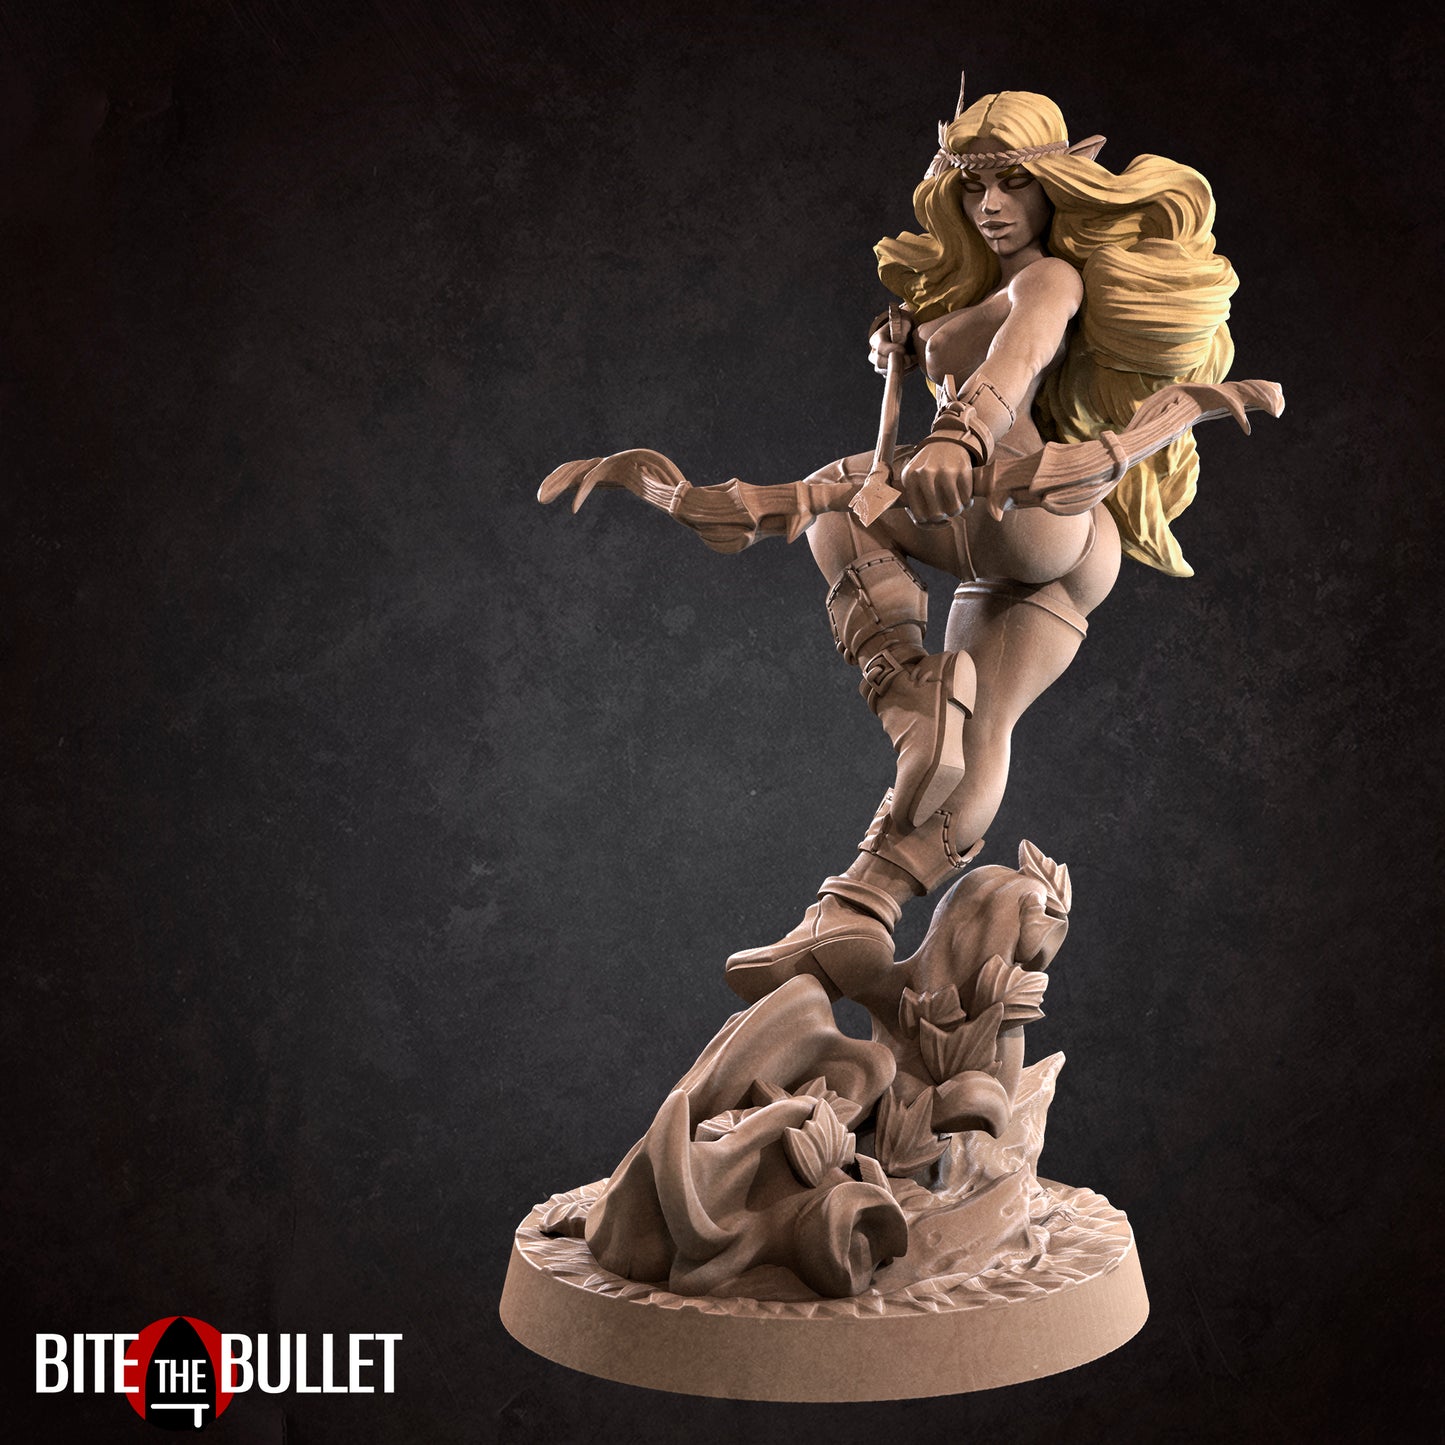 Lenore, Pinup SFW NSFW Lovely Elf Woman, Curly-Haired Amazon with Bow and Arrow | D&D Miniature Pinup | Bite the Bullet - Tattles Told 3D